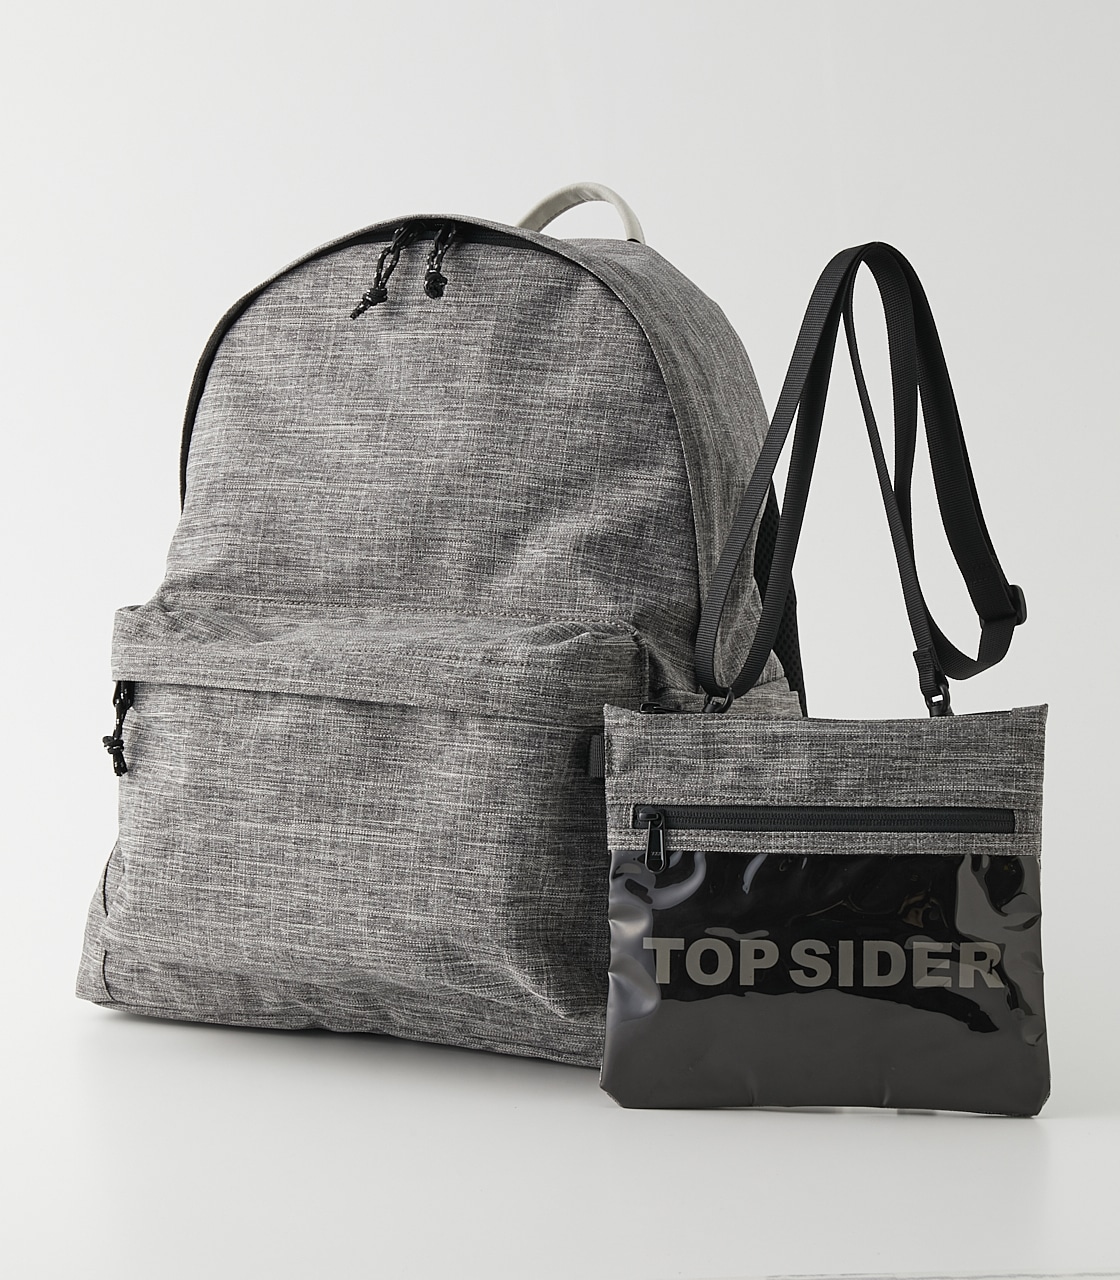 TOP SIDER×AZUL BACKPACK/TOP SIDER×AZULバックパック 詳細画像 L/GRY 1